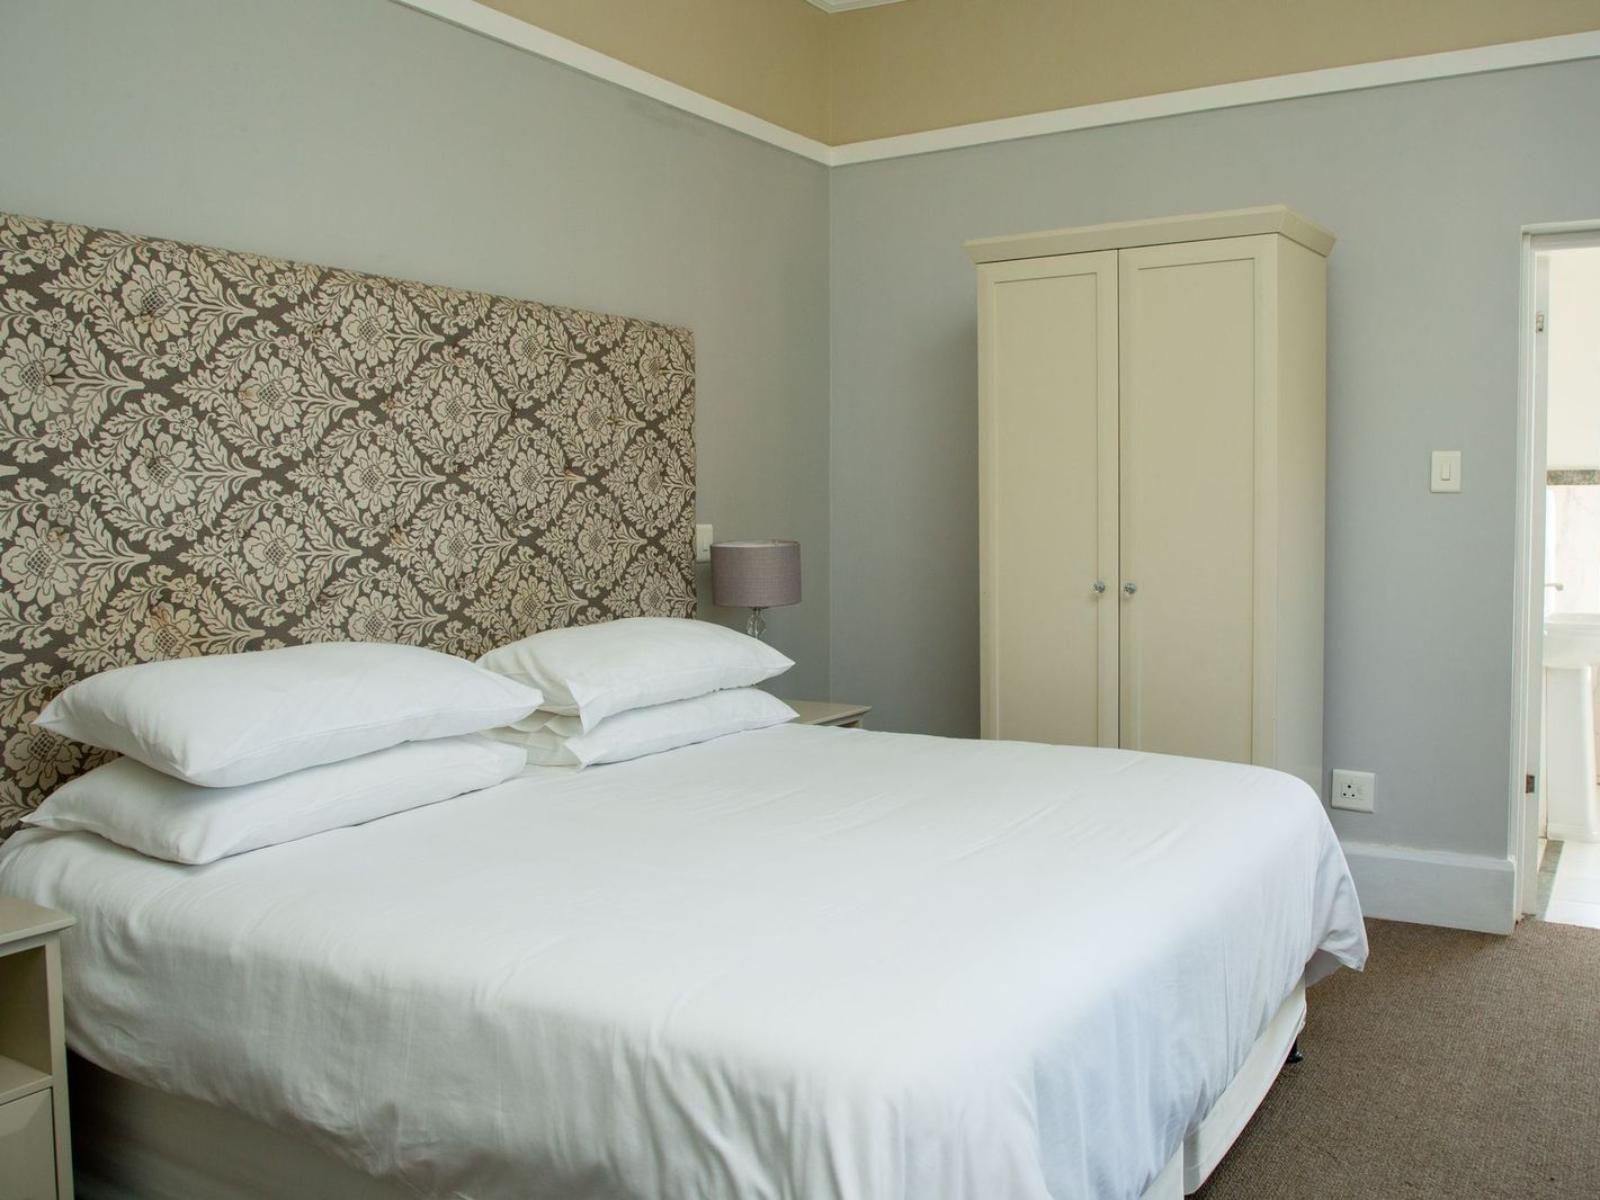 The Saint James On Venice Boutique Hotel Morningside Durban Kwazulu Natal South Africa Unsaturated, Bedroom